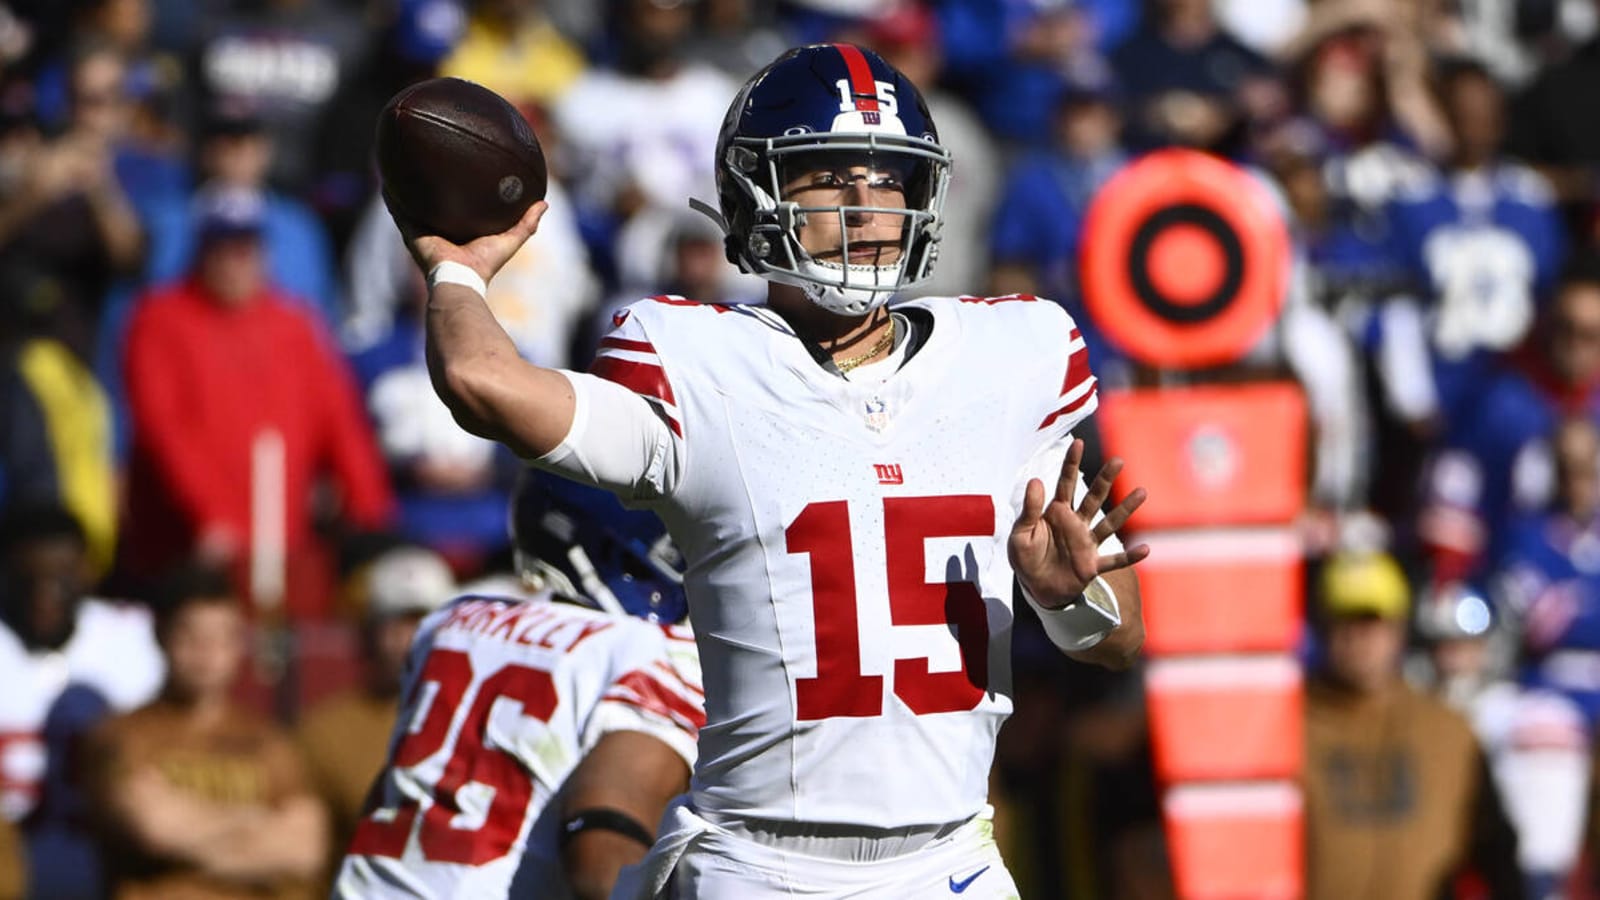 Tommy DeVito addresses fans wanting Giants to lose